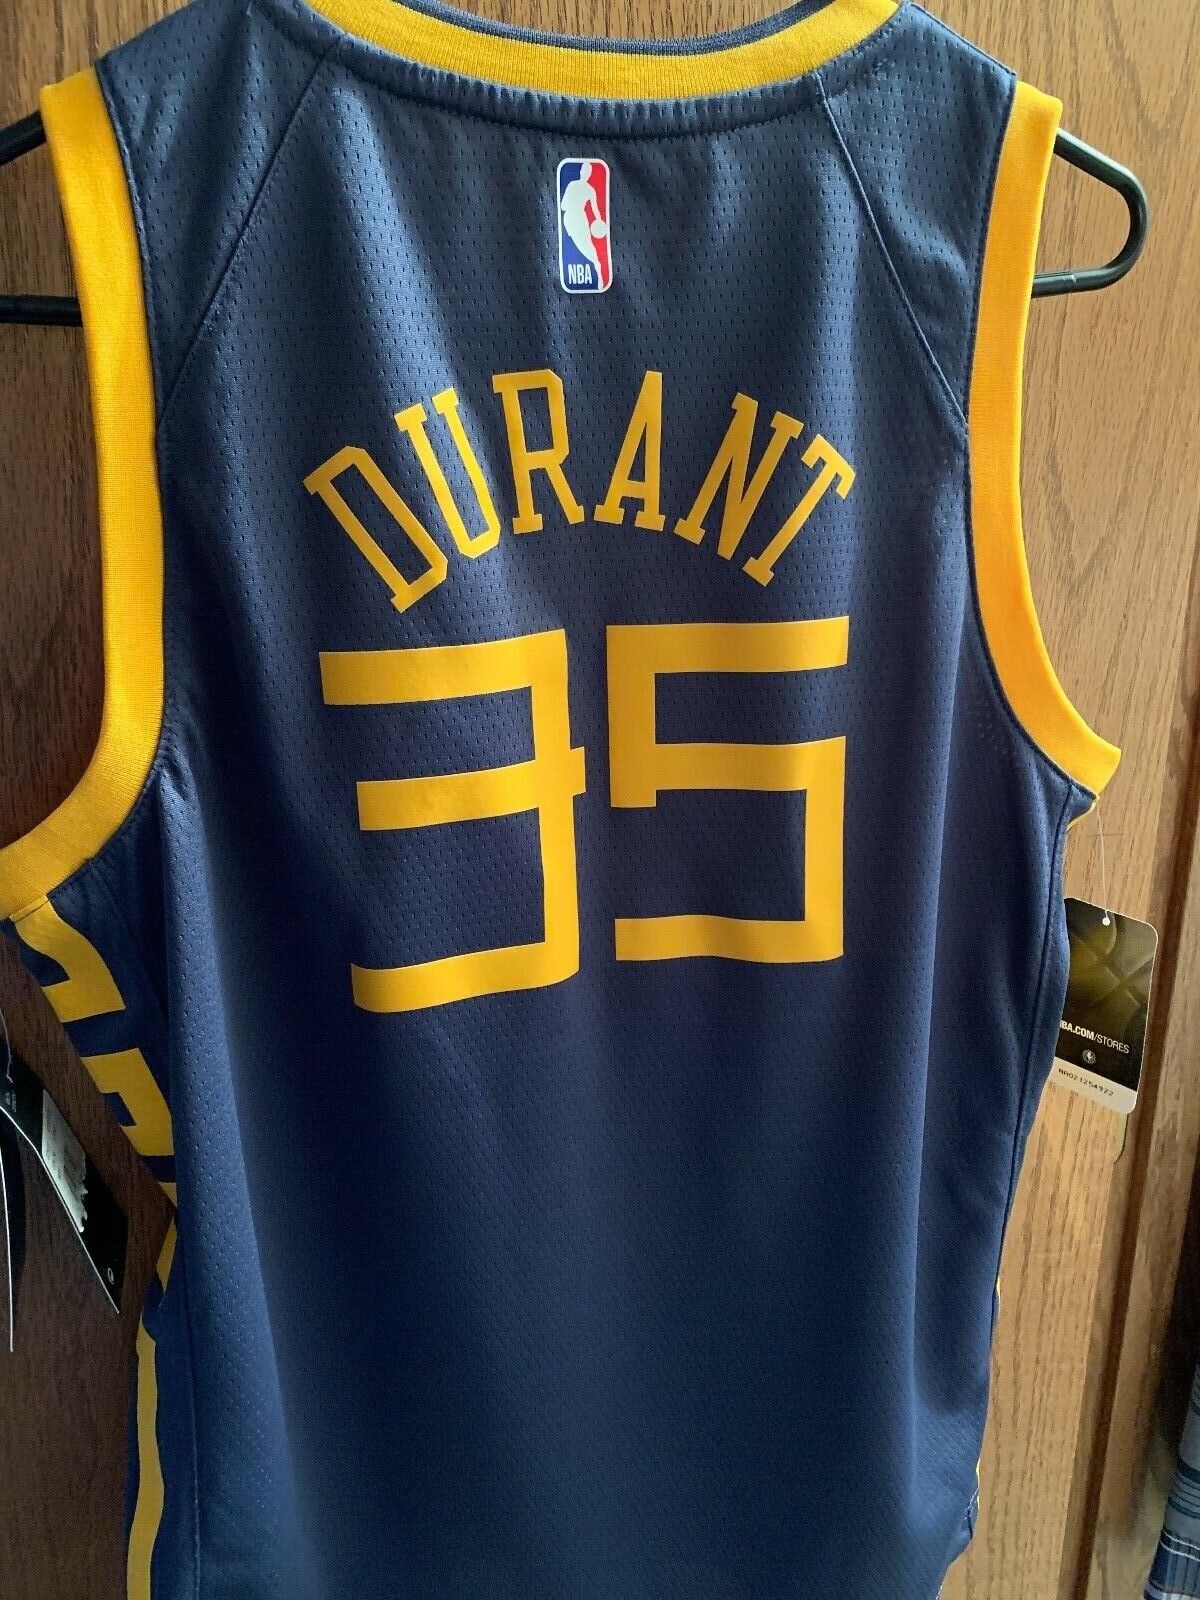 Golden State Warriors 2019 "The Bay" NBA jersey - Kevin Durant -  Youth "L"